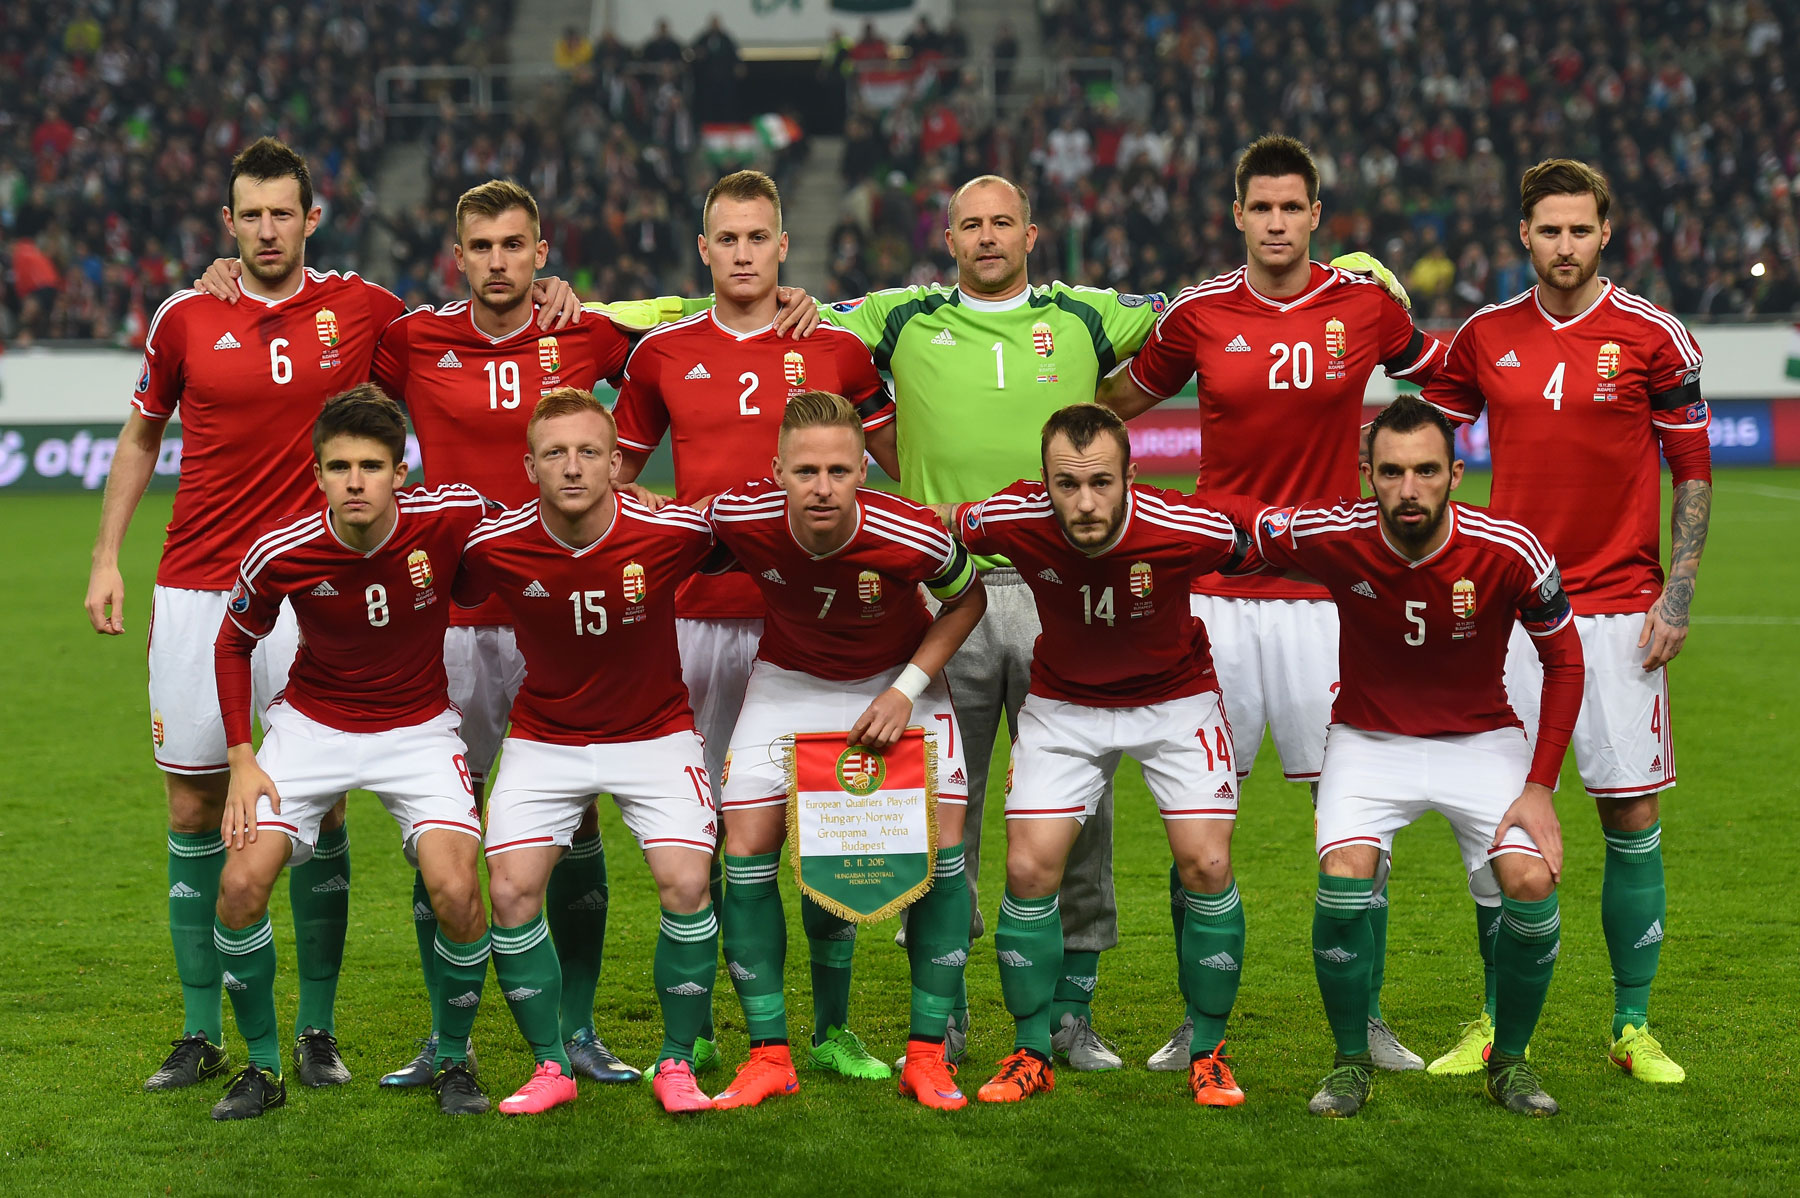 Euro 2016 - Austria v Hungary, betting preview - Betting Tips, Odds